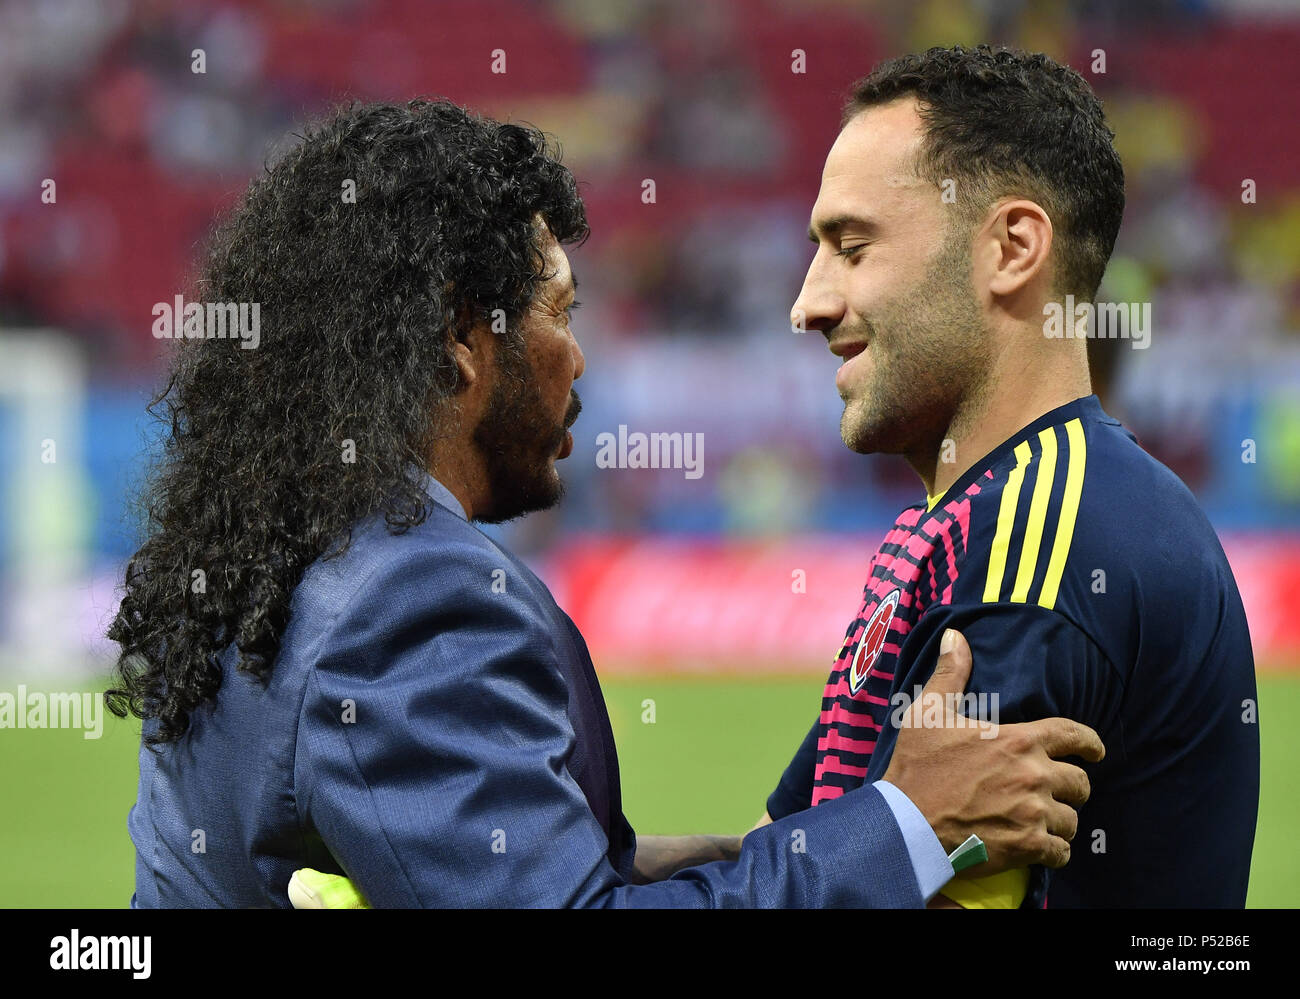 Kazan, Russia. 24th June, 2018. Former Colombia's goalkeeper Rene Higuita (L) is seen prior to the 2018 FIFA World Cup Group H match between Poland and Colombia in Kazan, Russia, June 24, 2018. Credit: He Canling/Xinhua/Alamy Live News Stock Photo